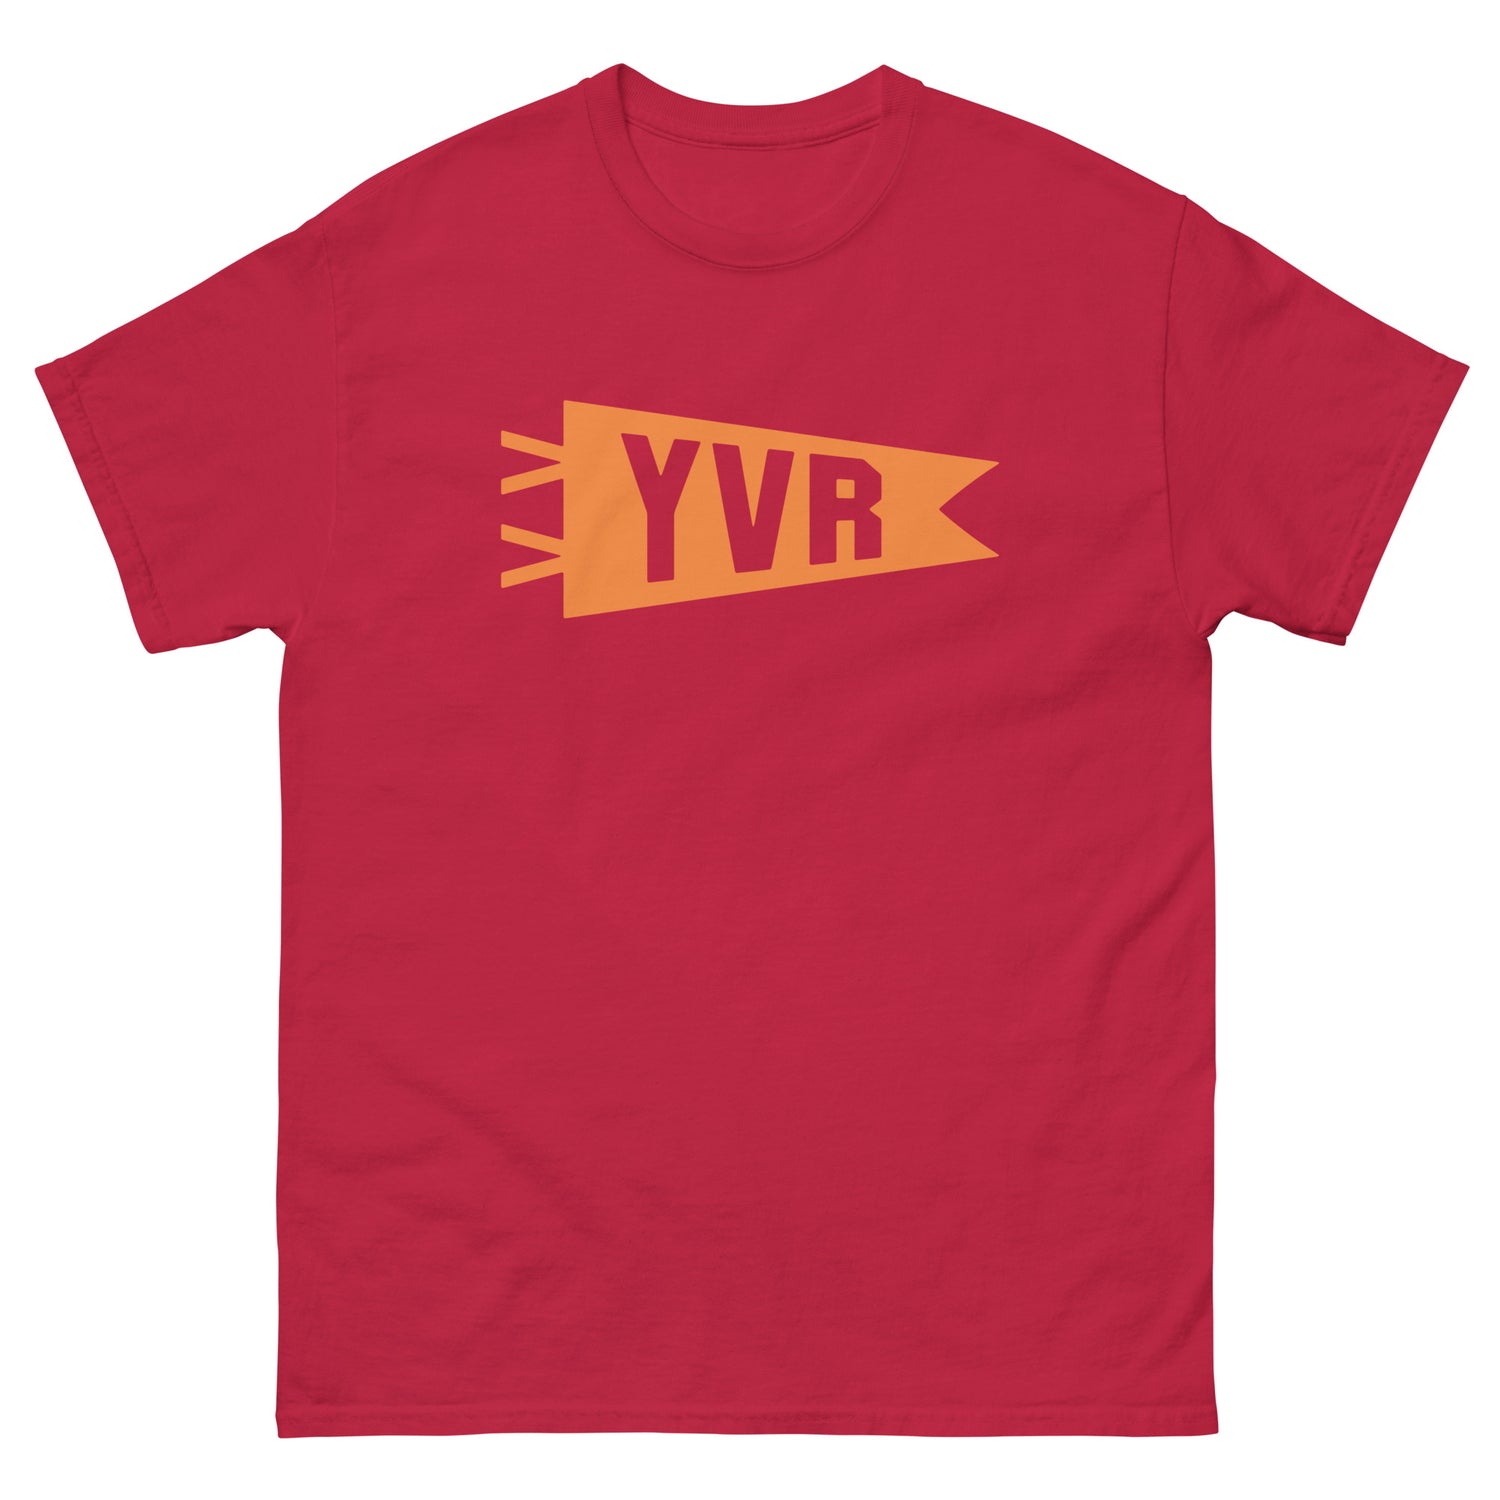 Vancouver British Columbia Adult T-Shirts • YVR Airport Code